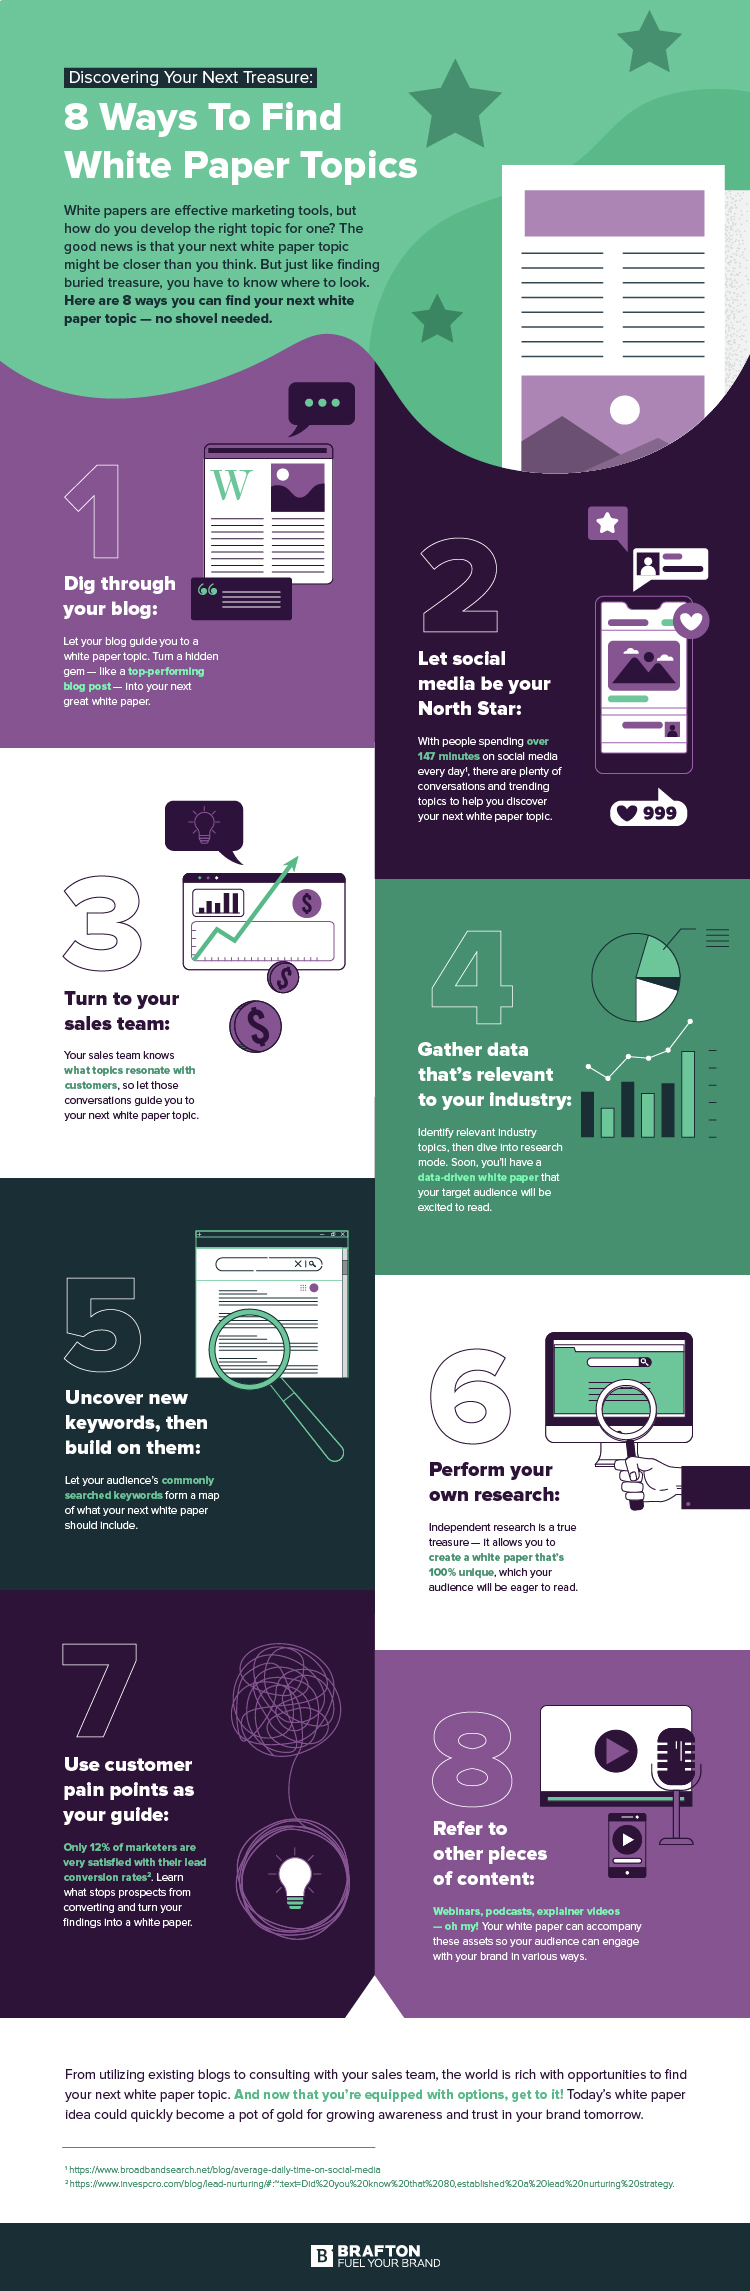 8 Ways To Find White Paper Topics Infographic